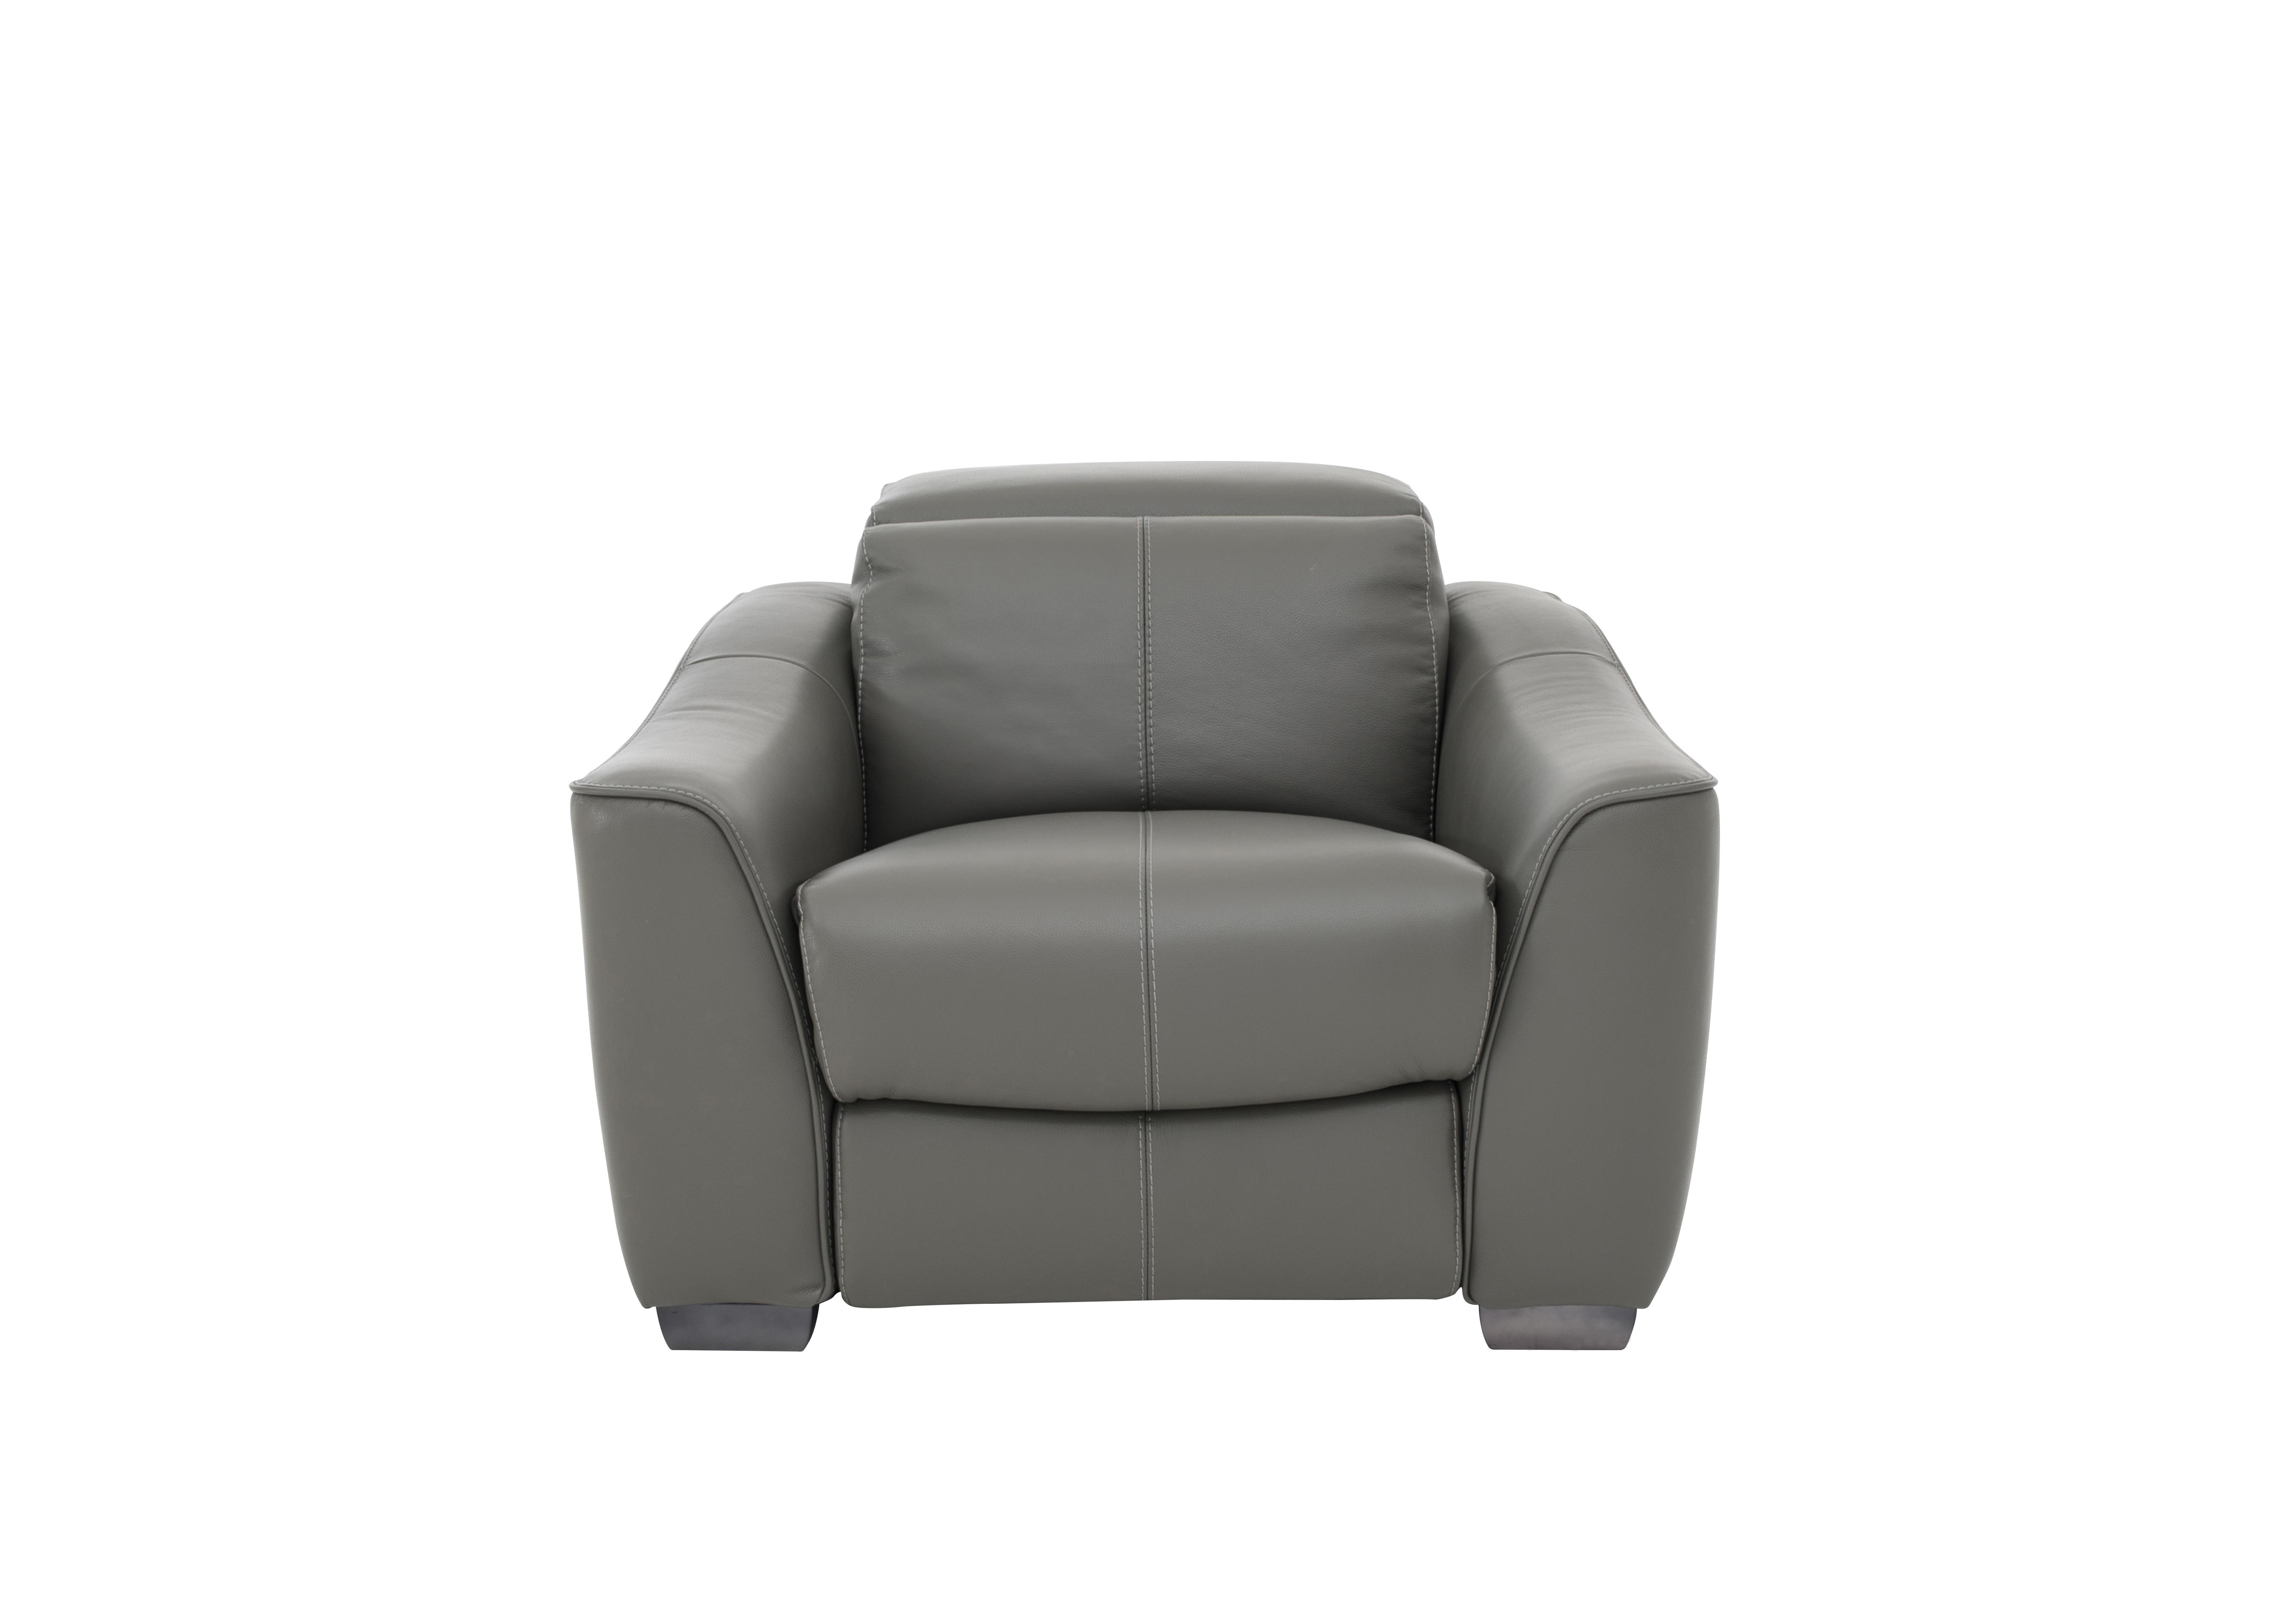 Xavier Leather Armchair in Nc-088e Charcoal Grey on Furniture Village